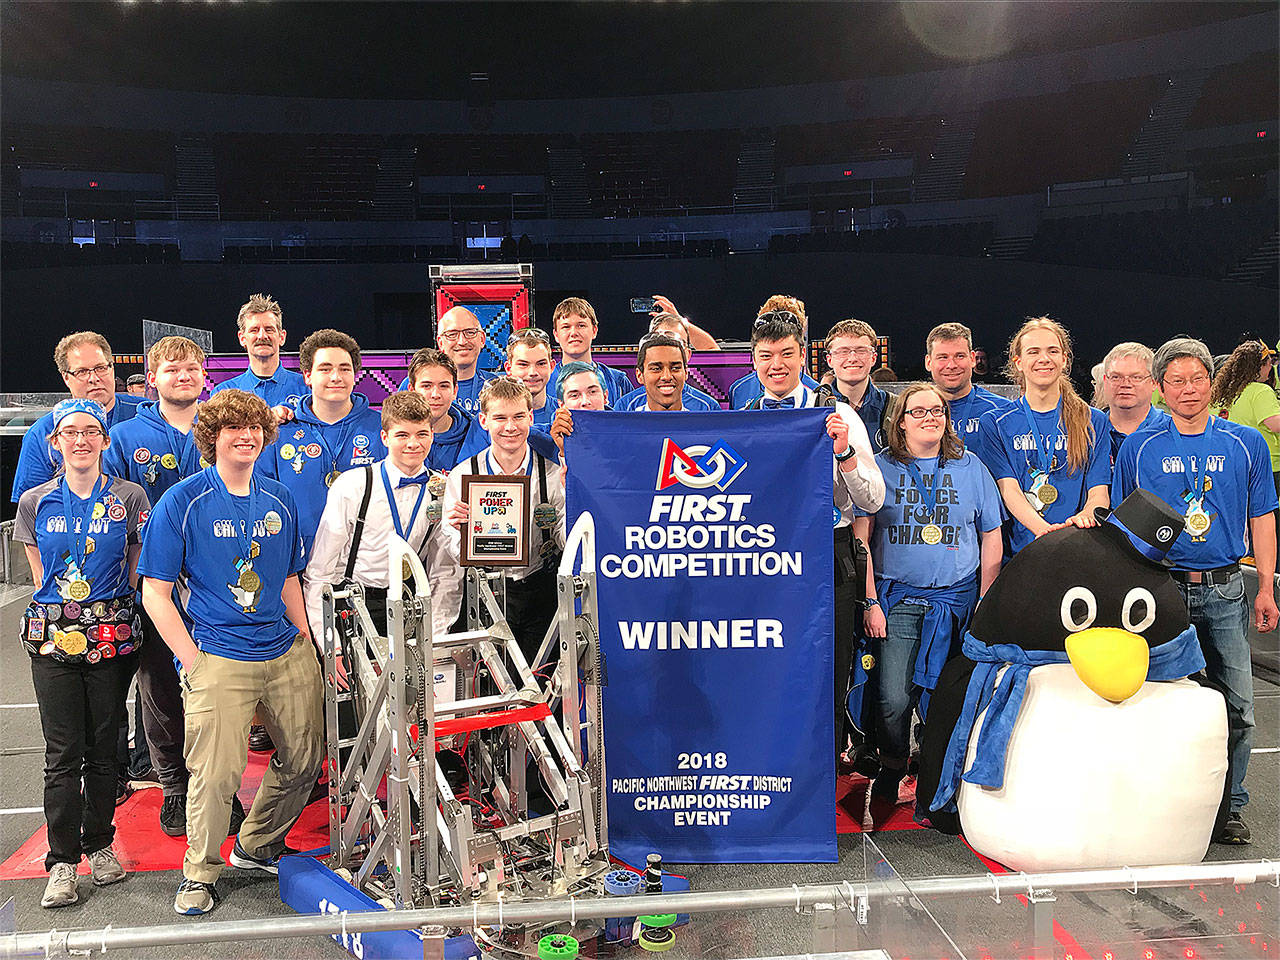 The Mountlake Terrace High School “Chill Out” Team 1778 was part of the winning alliance at the FIRST Robotics Competition Pacific Northwest District Championship, held April 4-7 in Portland. (Contributed photo)